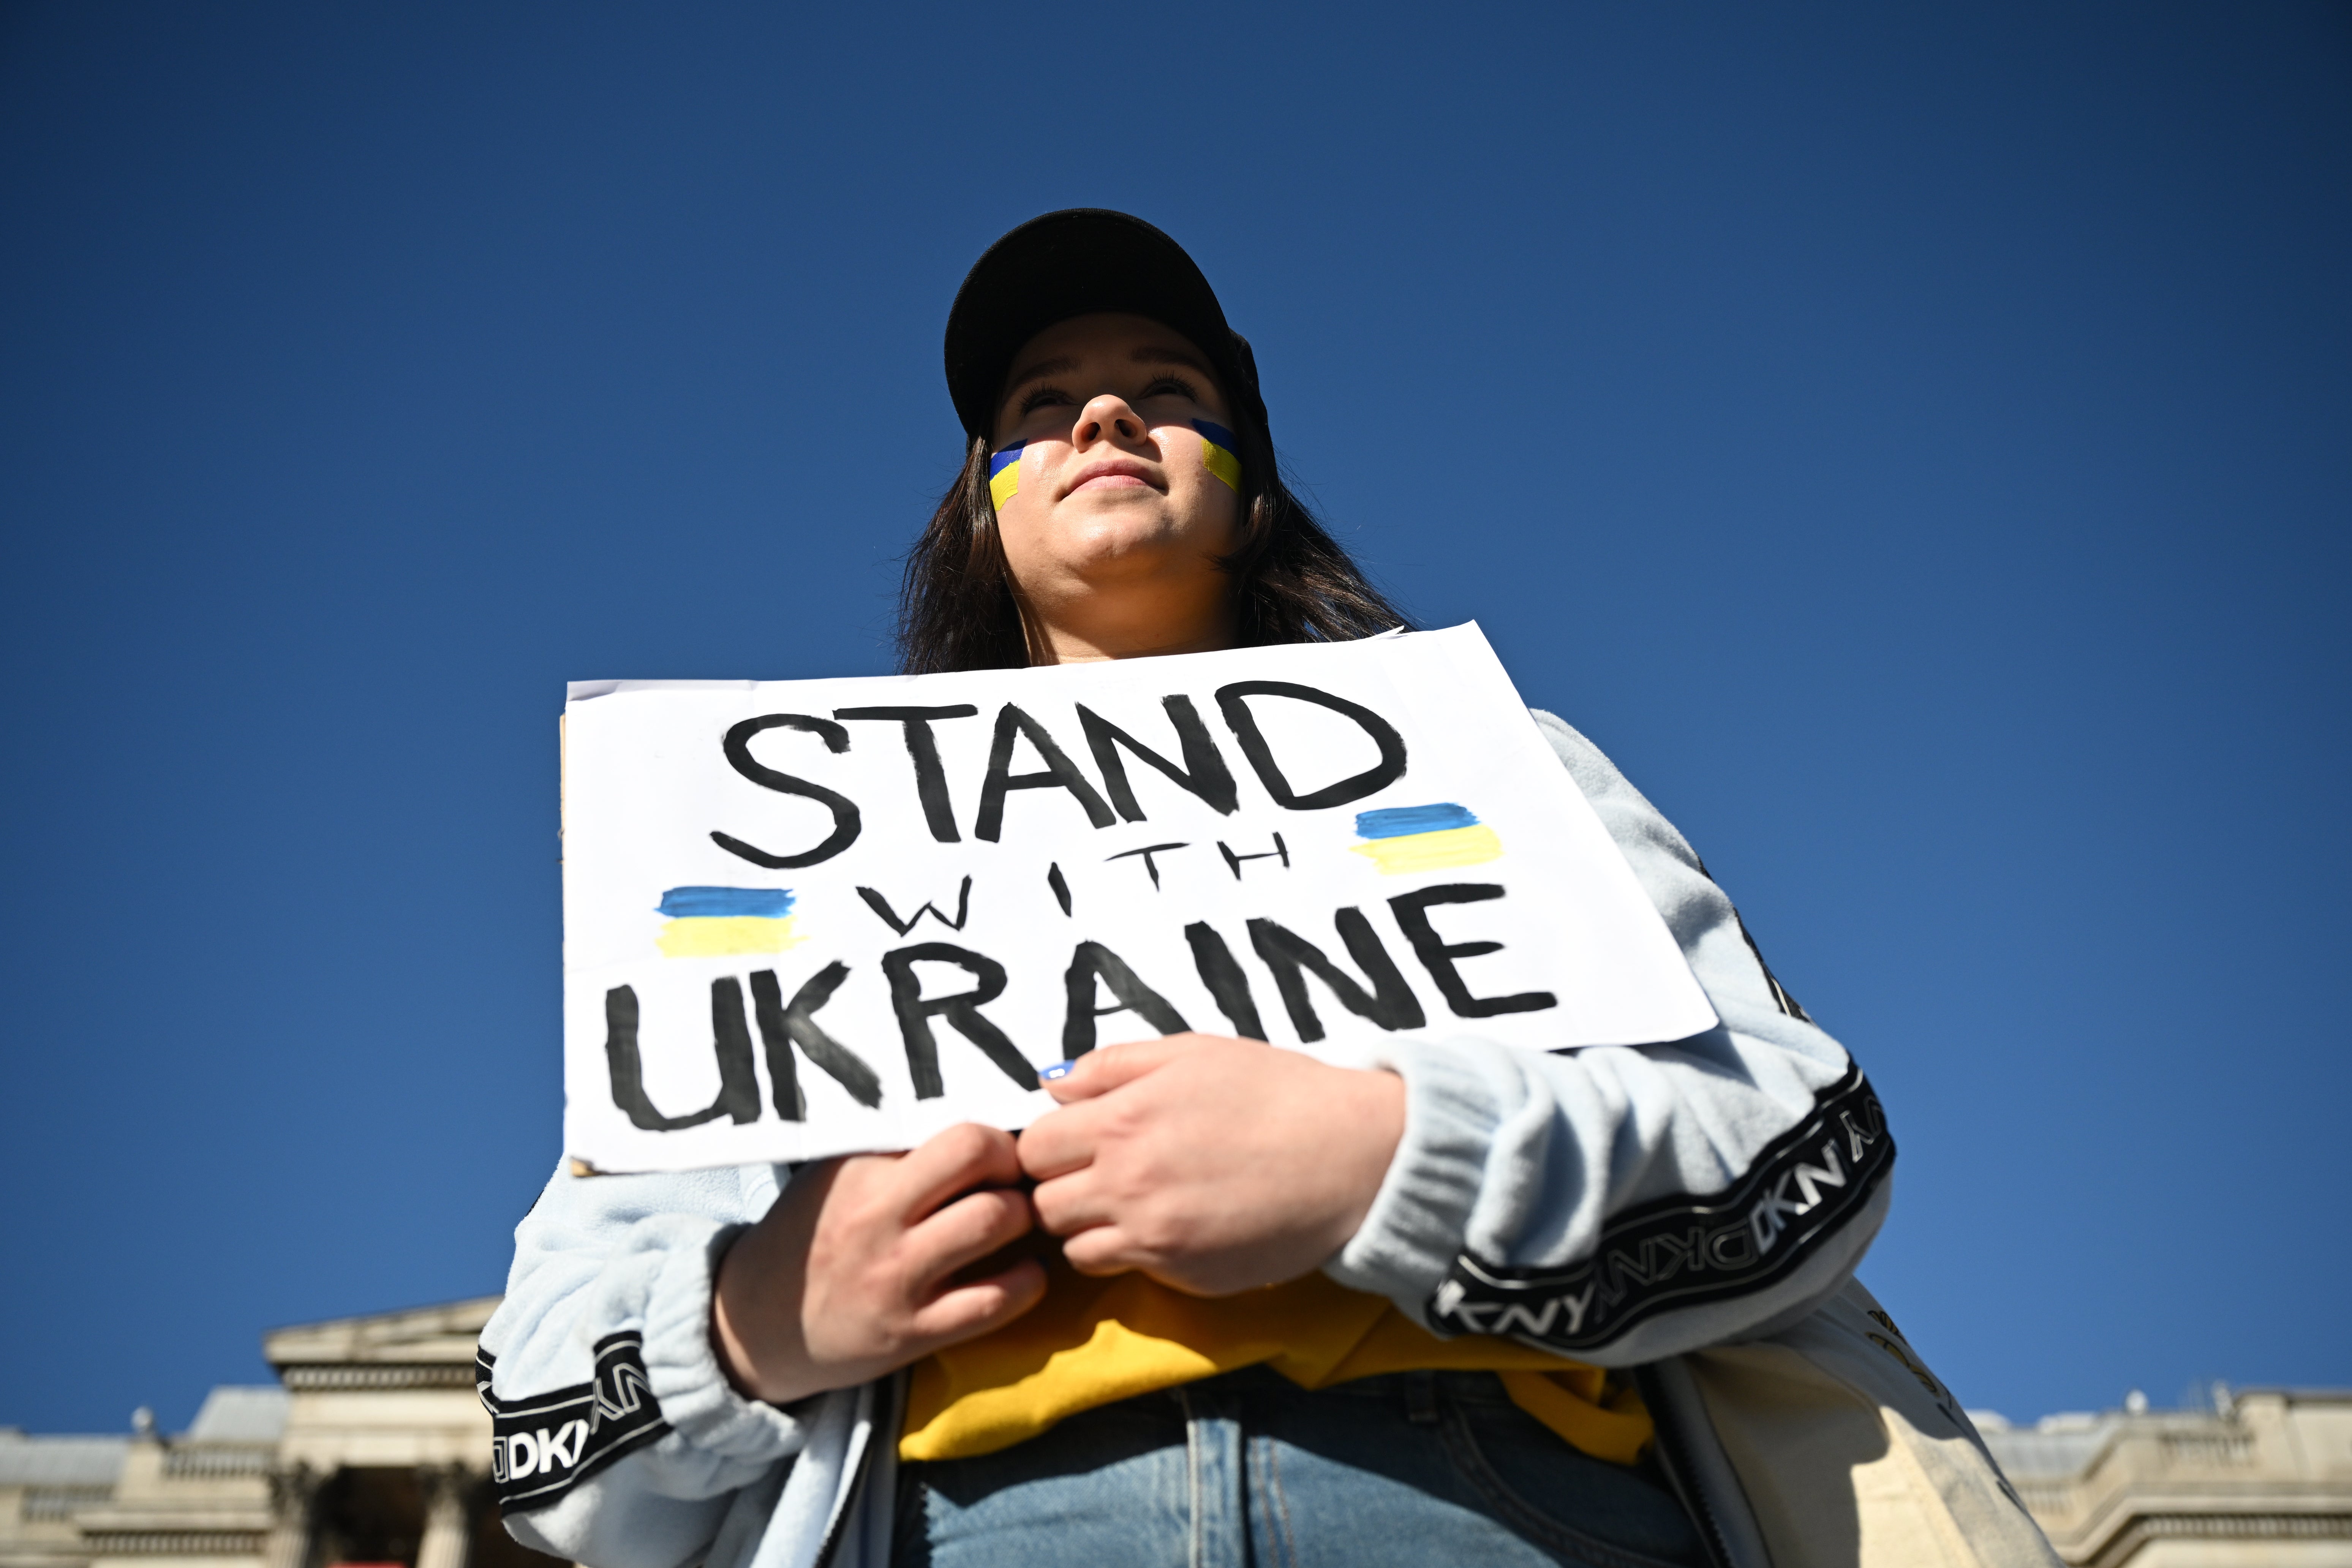 Protesters demonstrate in support of Ukraine in Trafalgar Square on February 27, 2022 in London, England.